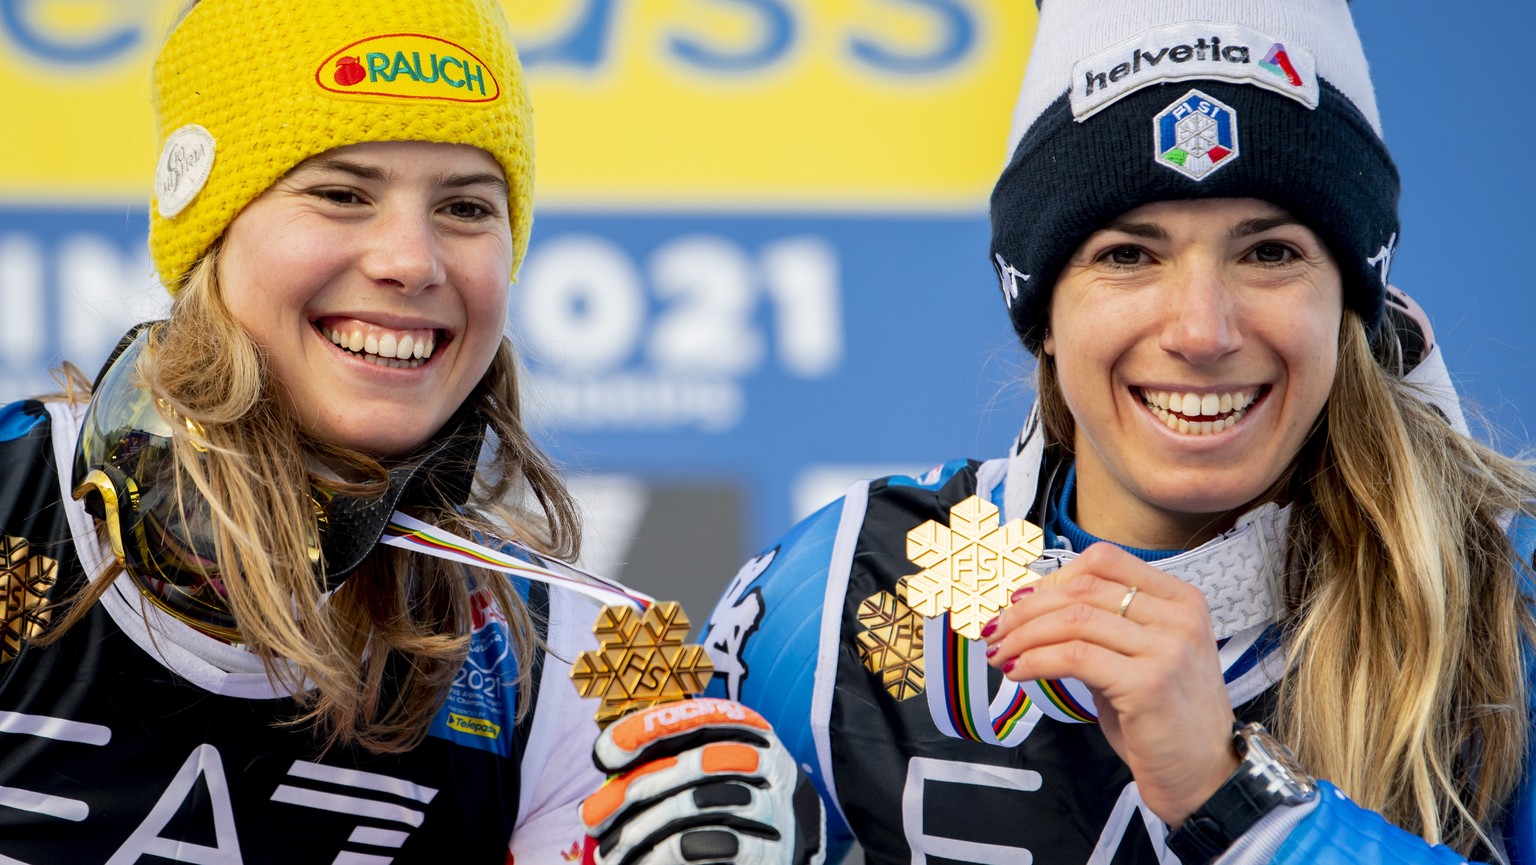 epa09016700 Katharina Liensberger of Austria (L) and Marta Bassino of Italy celebrate the Gold medals for Parallel race during the medals ceremony at the 2021 FIS Alpine Skiing World Championships in  ...